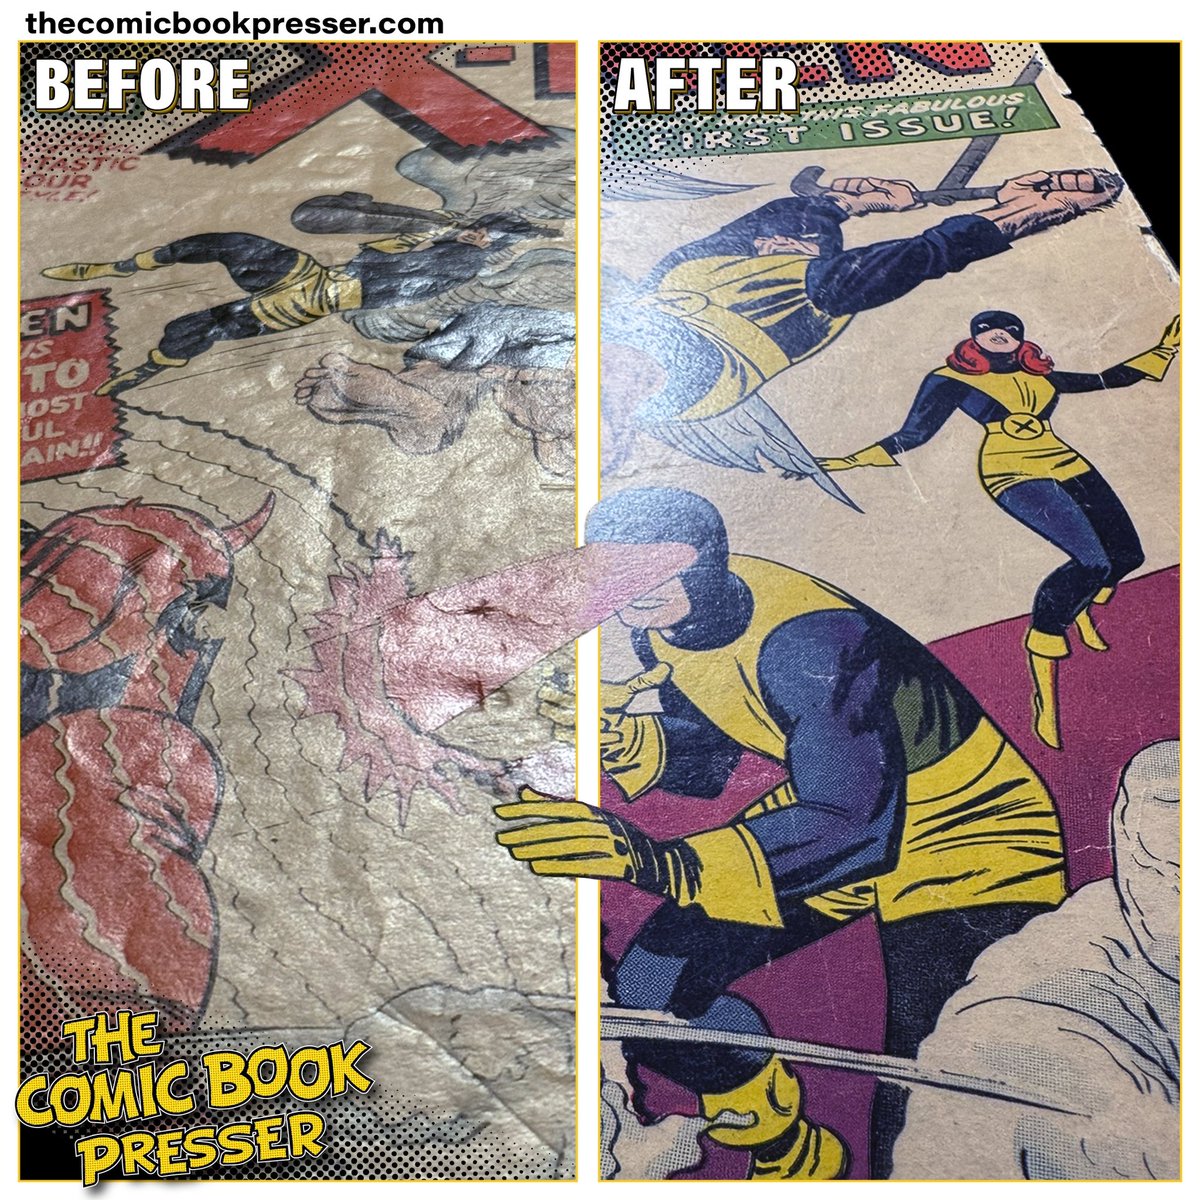 I'm excited to present this new graphic design. It reflects my commitment to innovative presentation and trendsetting within the pressing industry. Part 1 of 2.

#thecomicbookpresser #comicpressing #comicbookpressing #xmen #comics #marvelcomics #comicbook #CGC